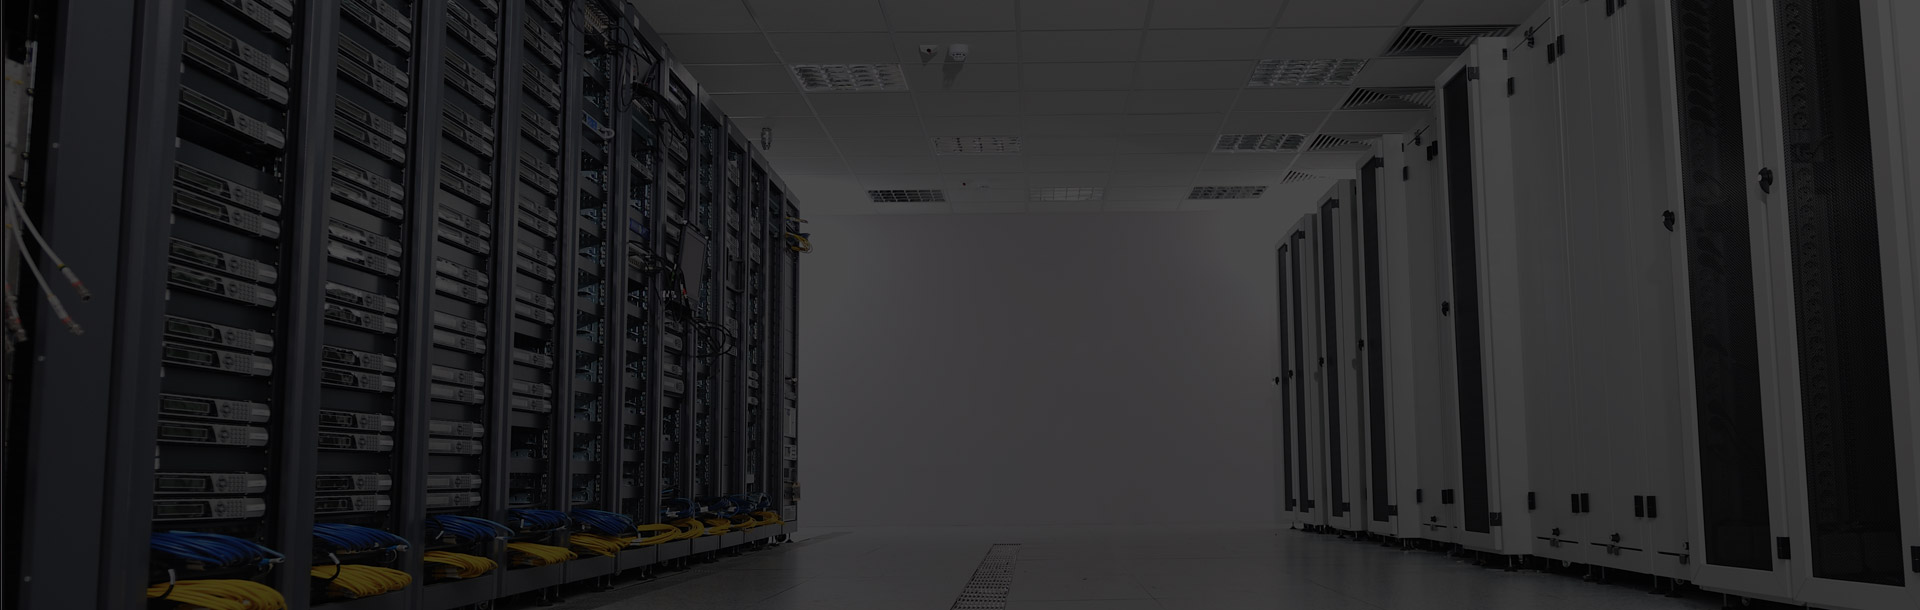 Offshore Fully Managed Dedicated Hosting Service